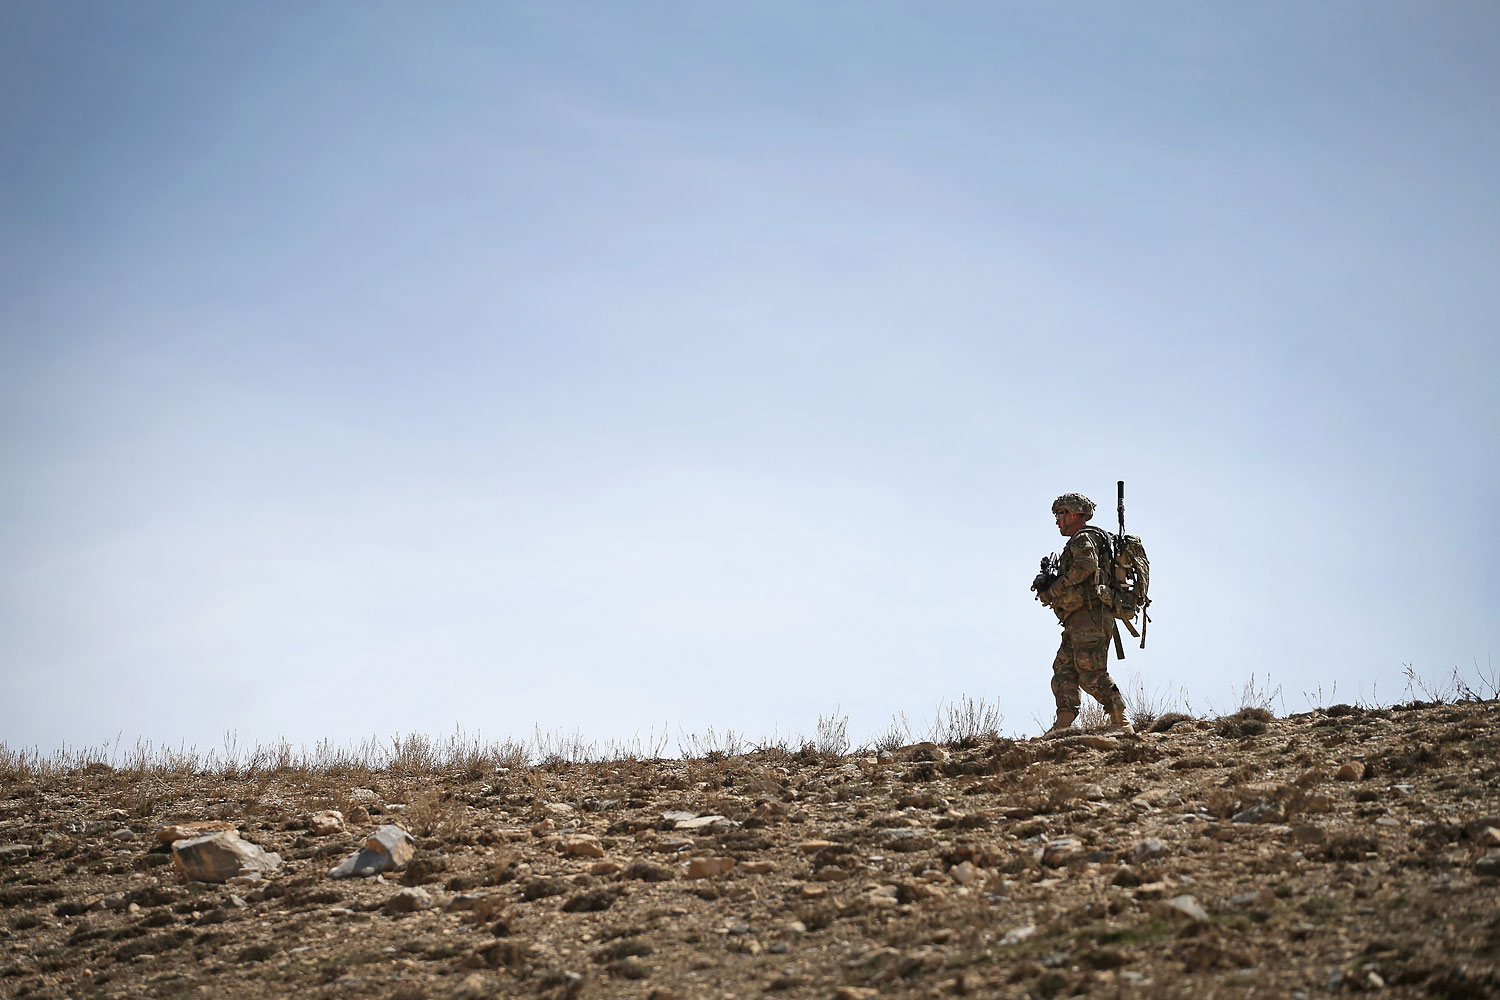 U.S. soldiers walks along a ridgeline during a patrol up a mountainside near Forward Operating Base Shank on March 31, 2014 near Pul-e Alam, Afghanistan. 